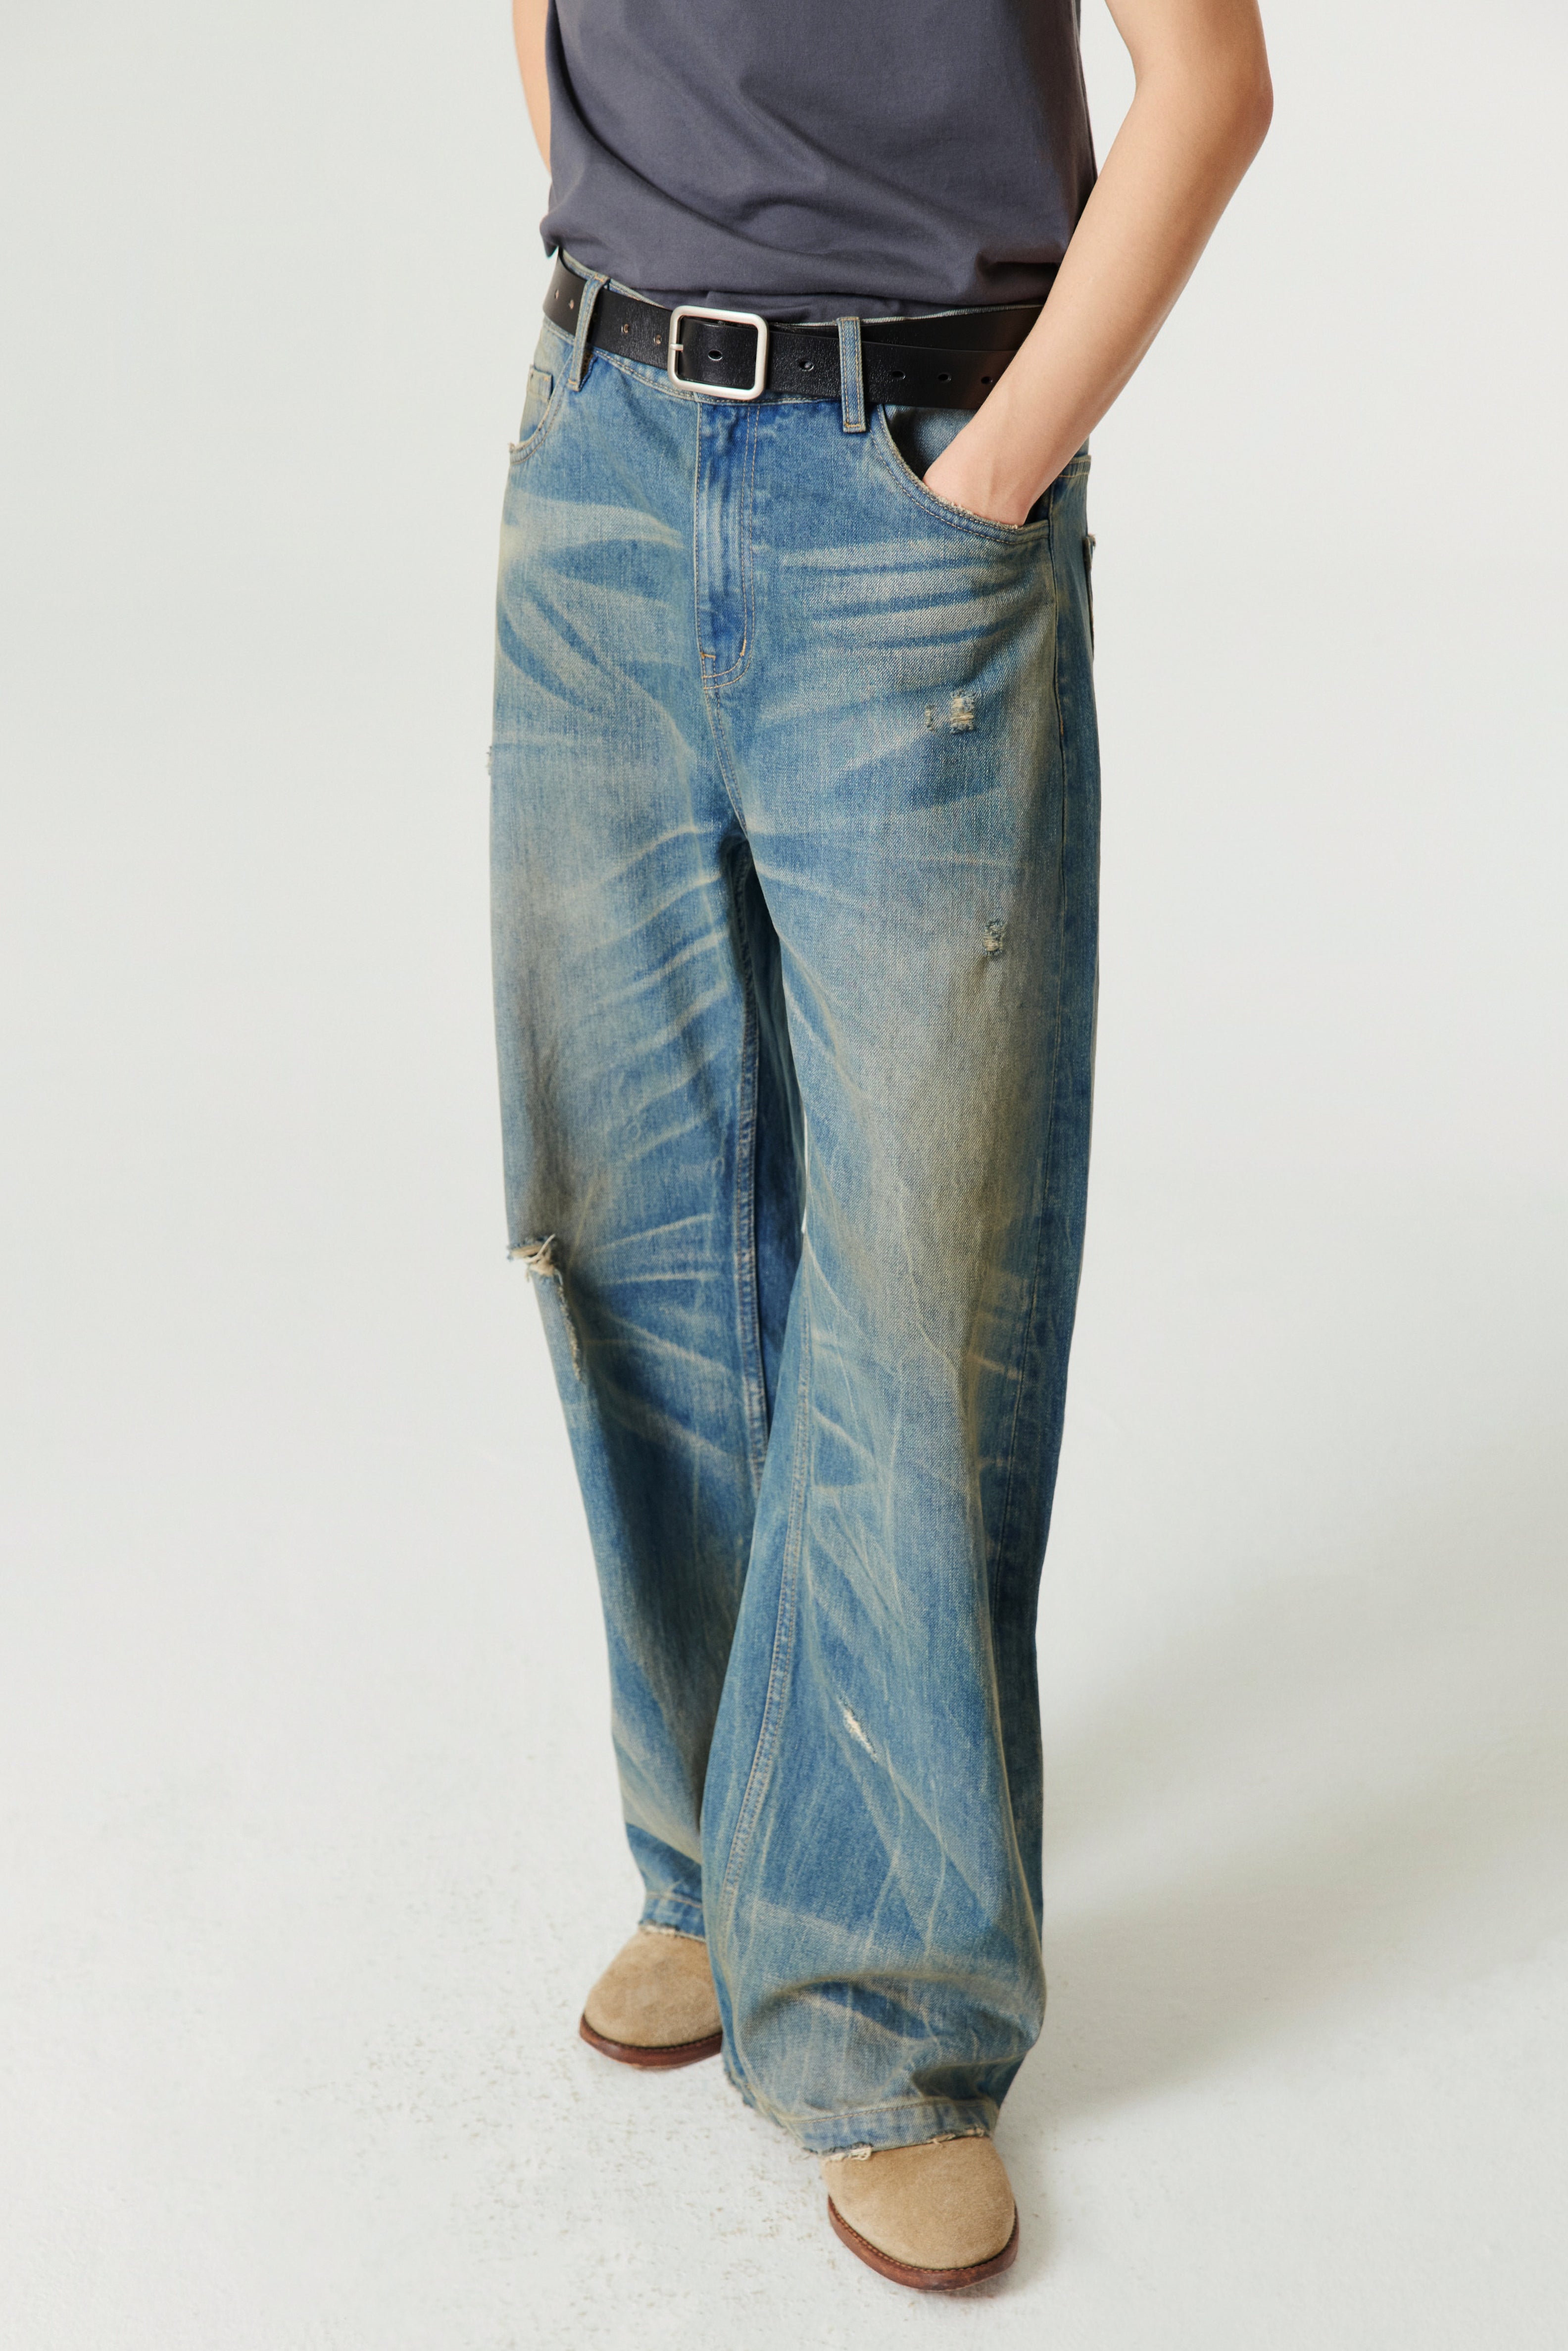 SIMPLE PROJECT NEVADA A-LINE JEANS